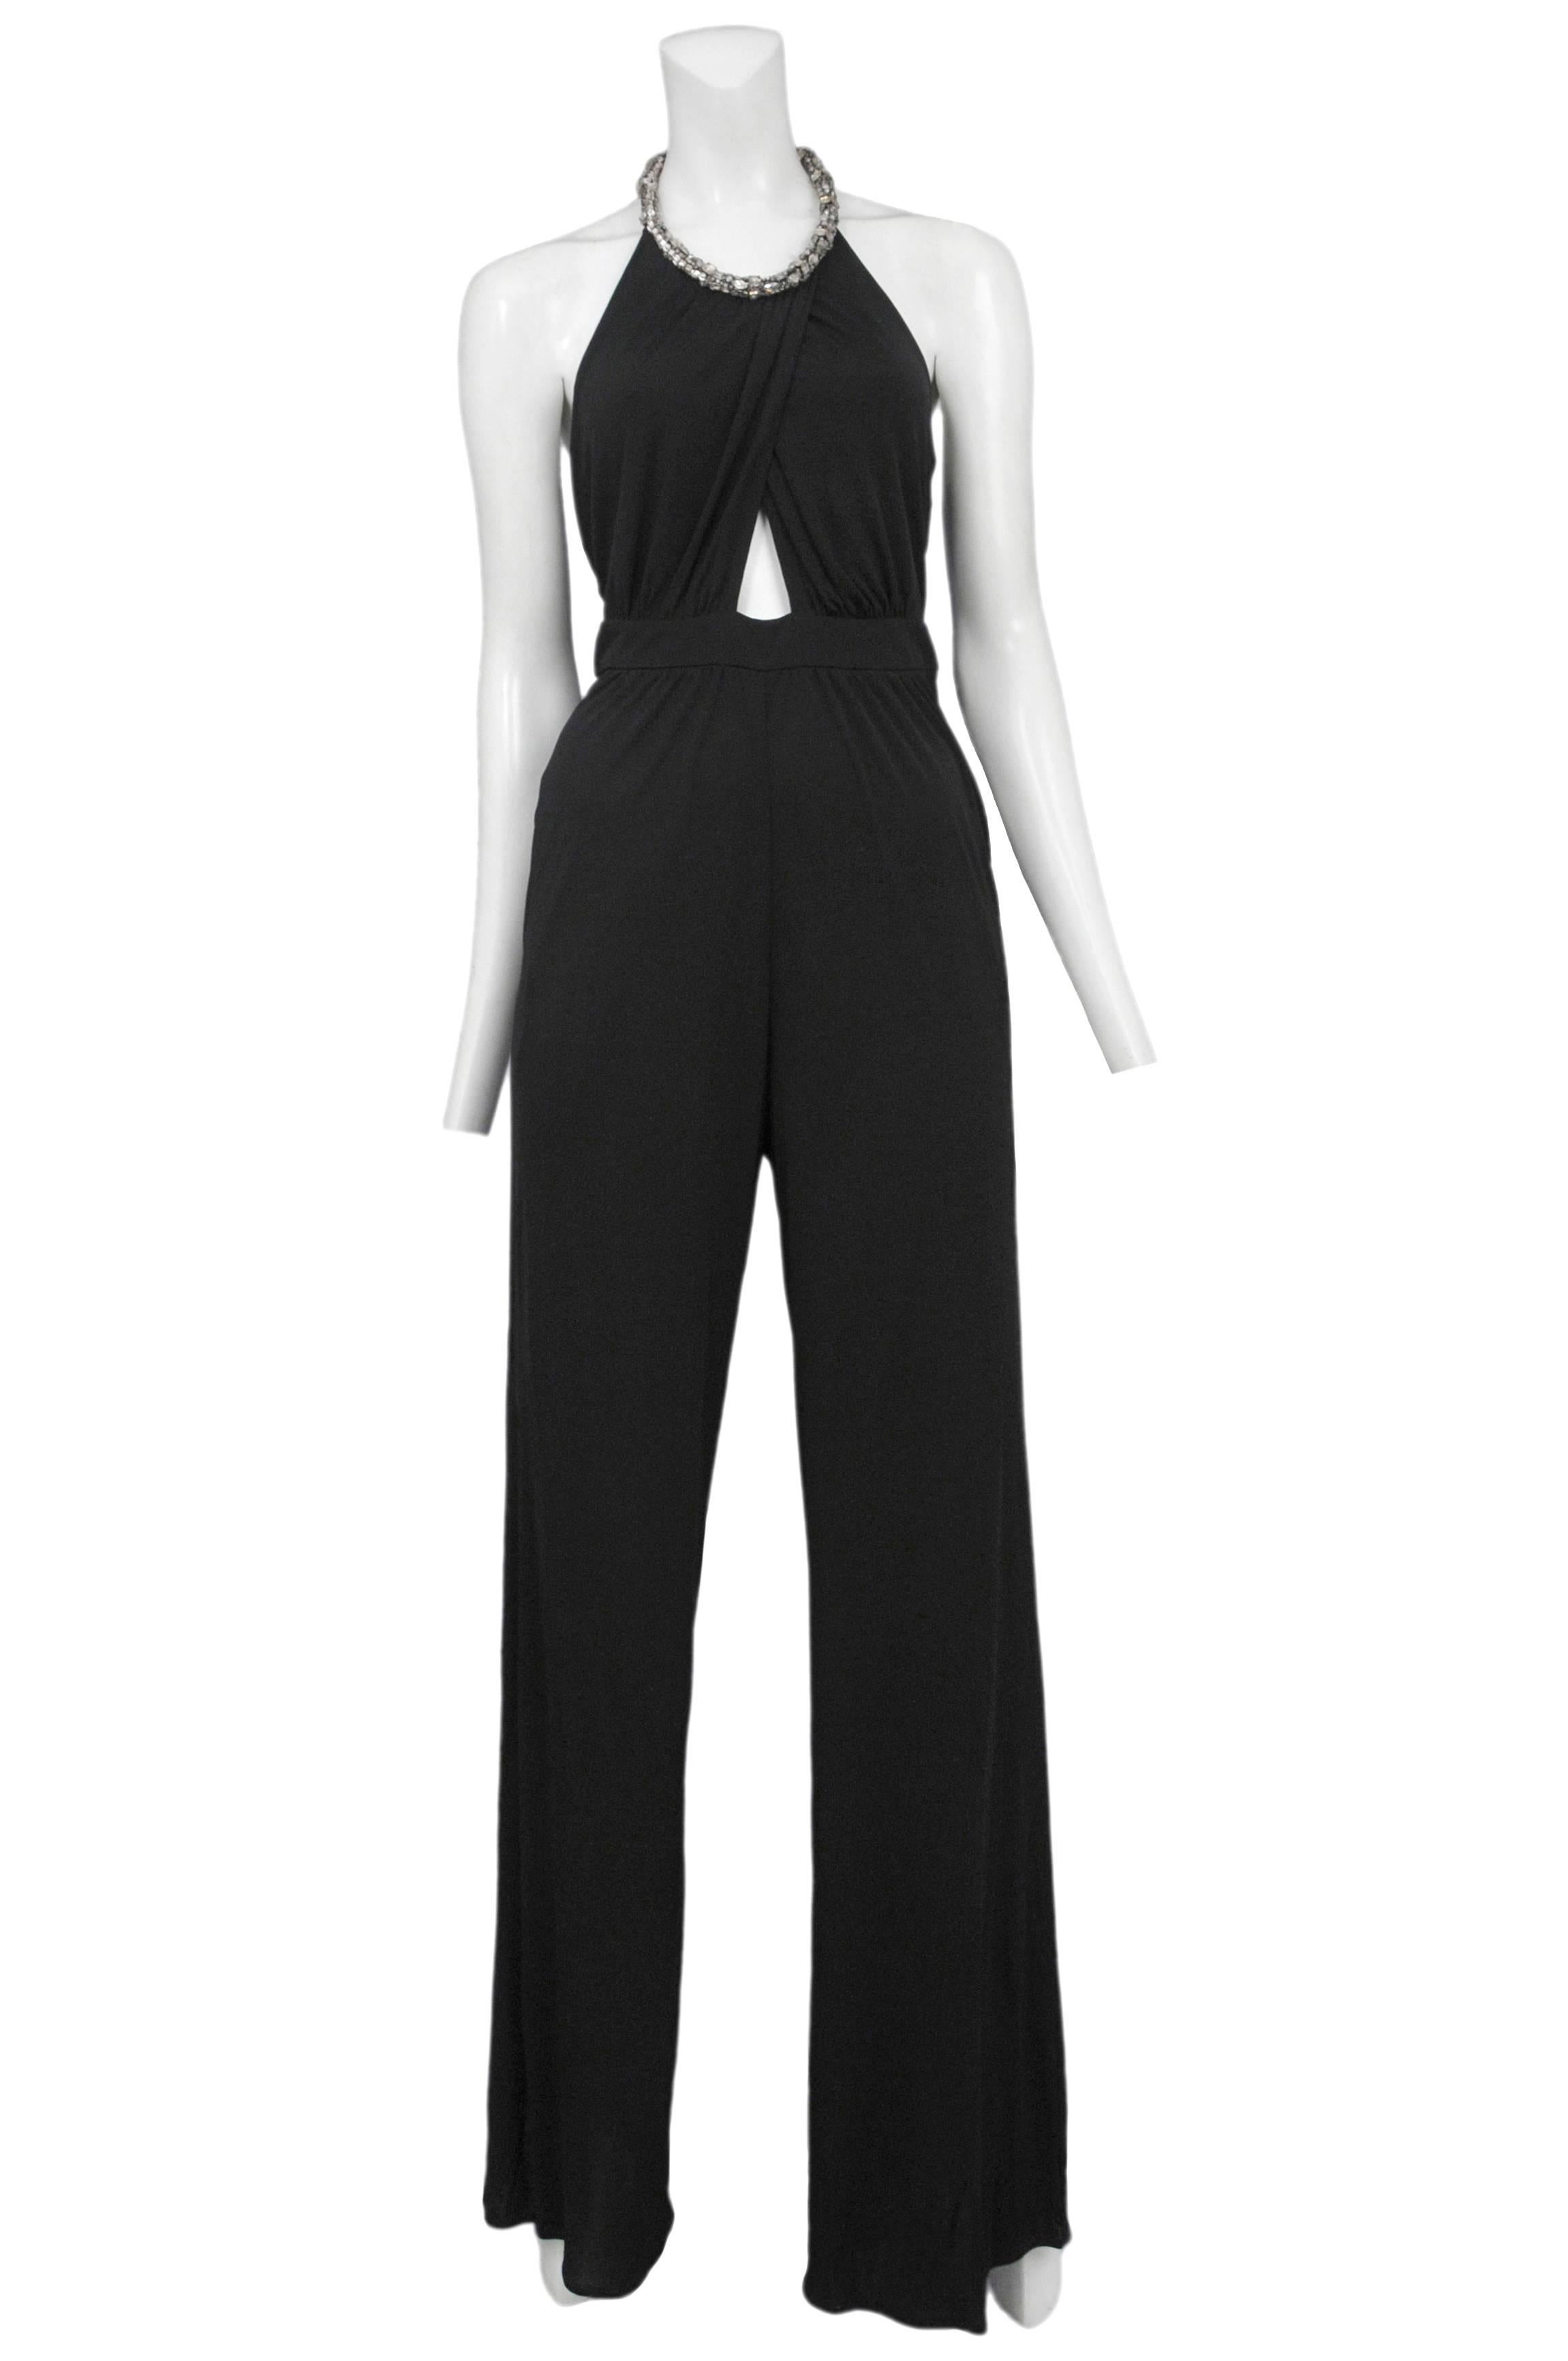 Vintage Roberto Cavalli black jersey jumpsuit featuring a waistband at the high waist, an overlapped halter style top with a built in rhinestone collar closure.
Please inquire for additional images.